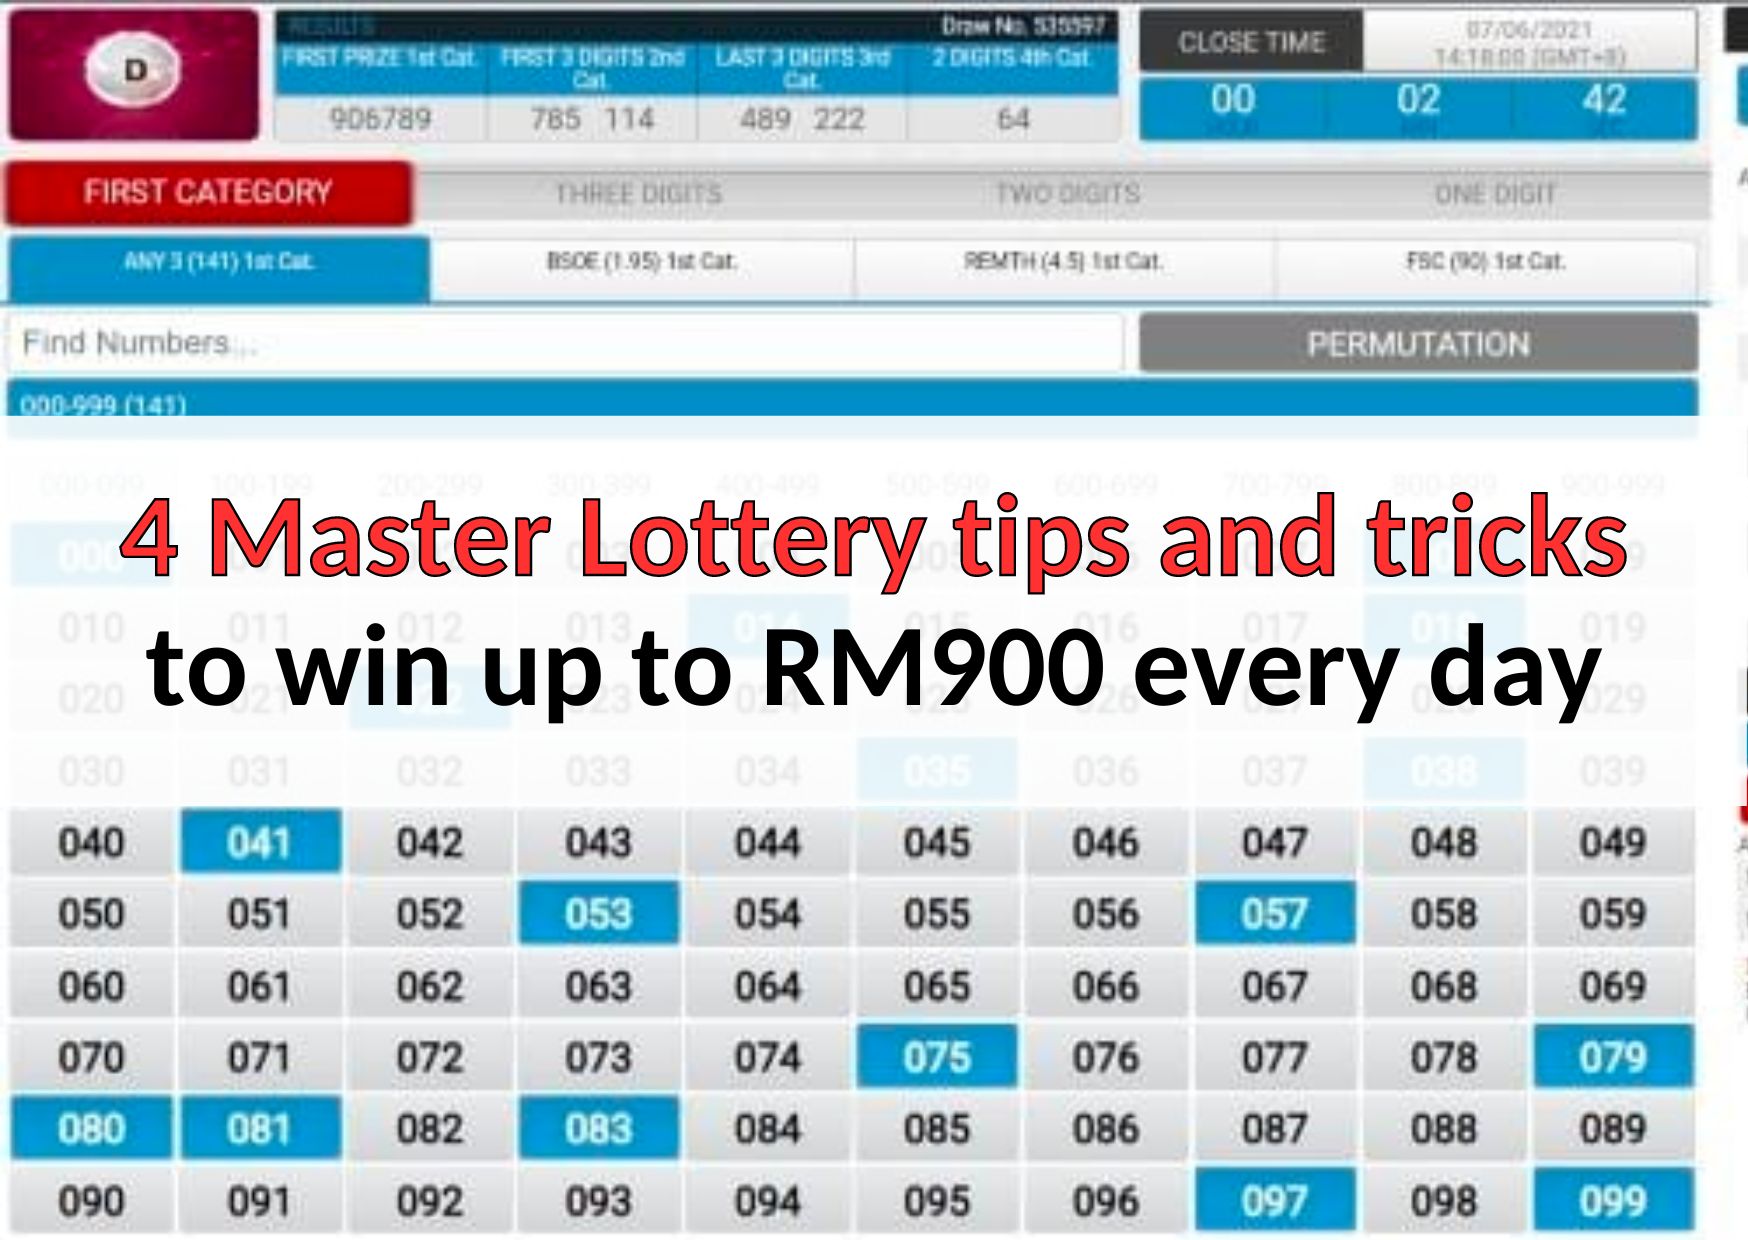 4 Master Lottery tips and tricks to win up to RM900 every day